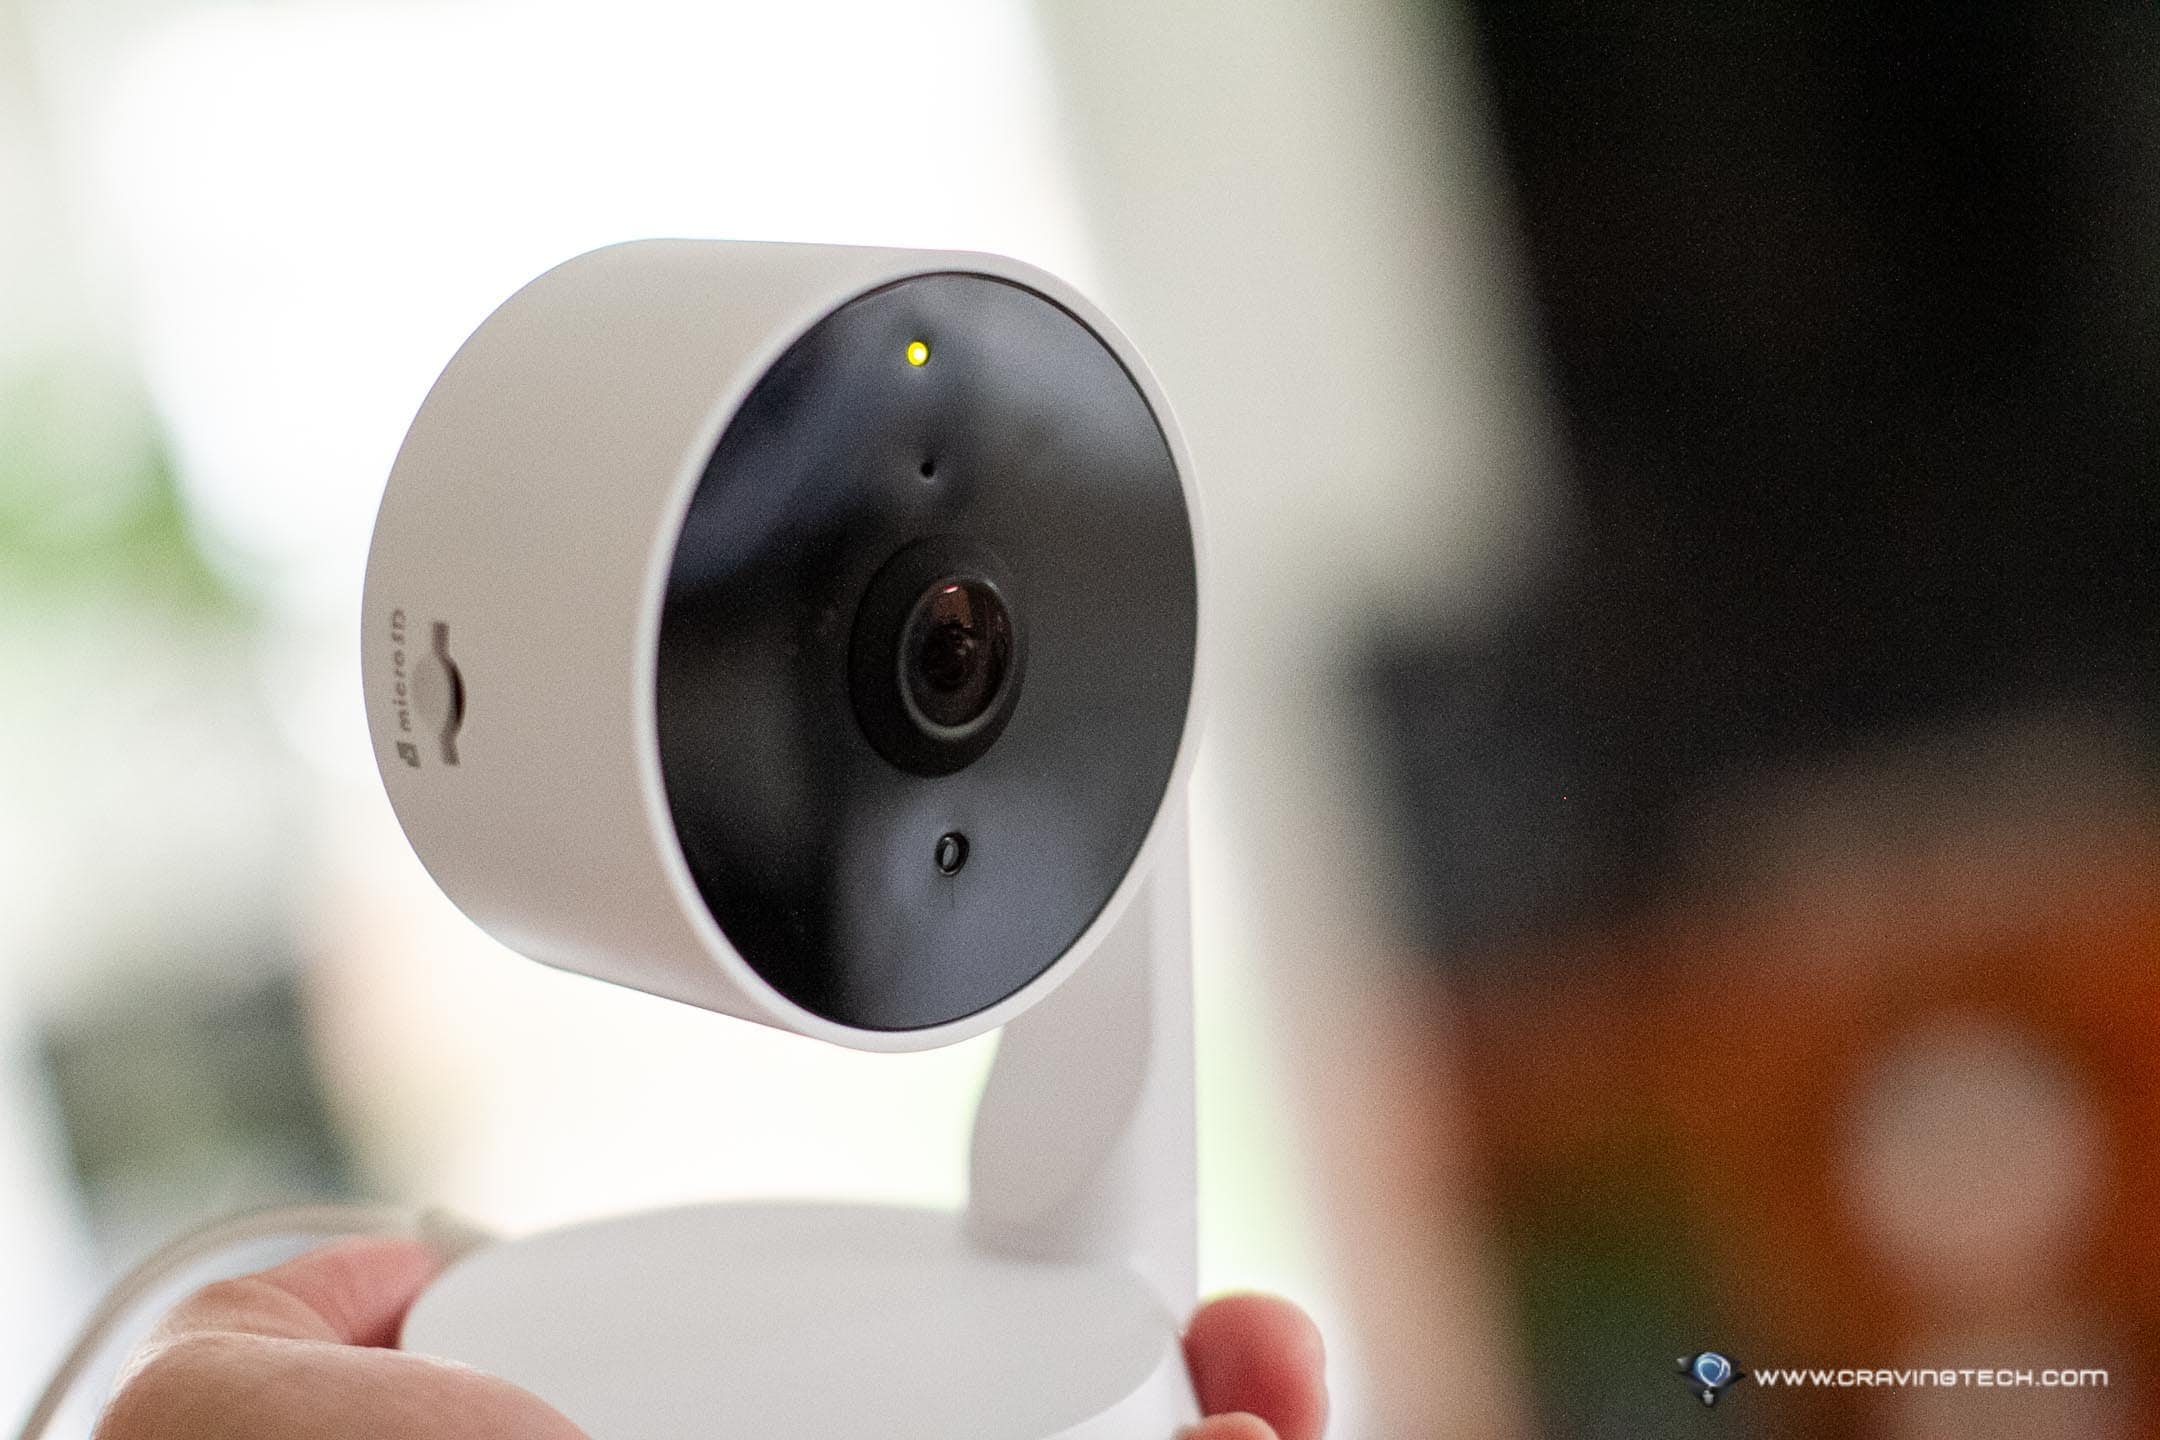 D-Link’s new Wi-Fi Camera has a built-in Smart Home Hub & Person Detection